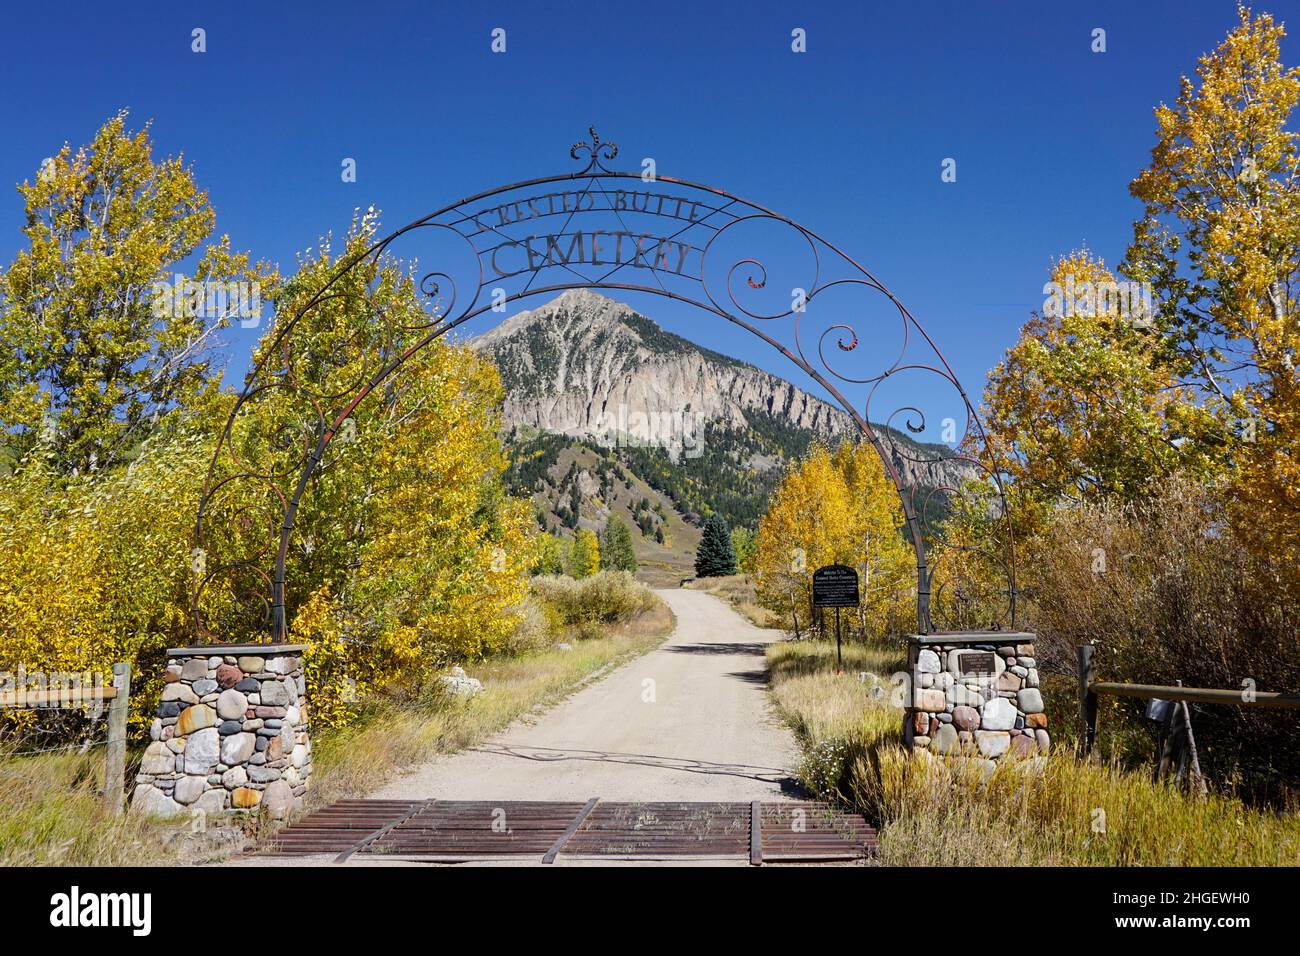 Crested Butte, Colorado, USA September 25, 2021: Gate for the Crested Butte Cemetery Stock Photo